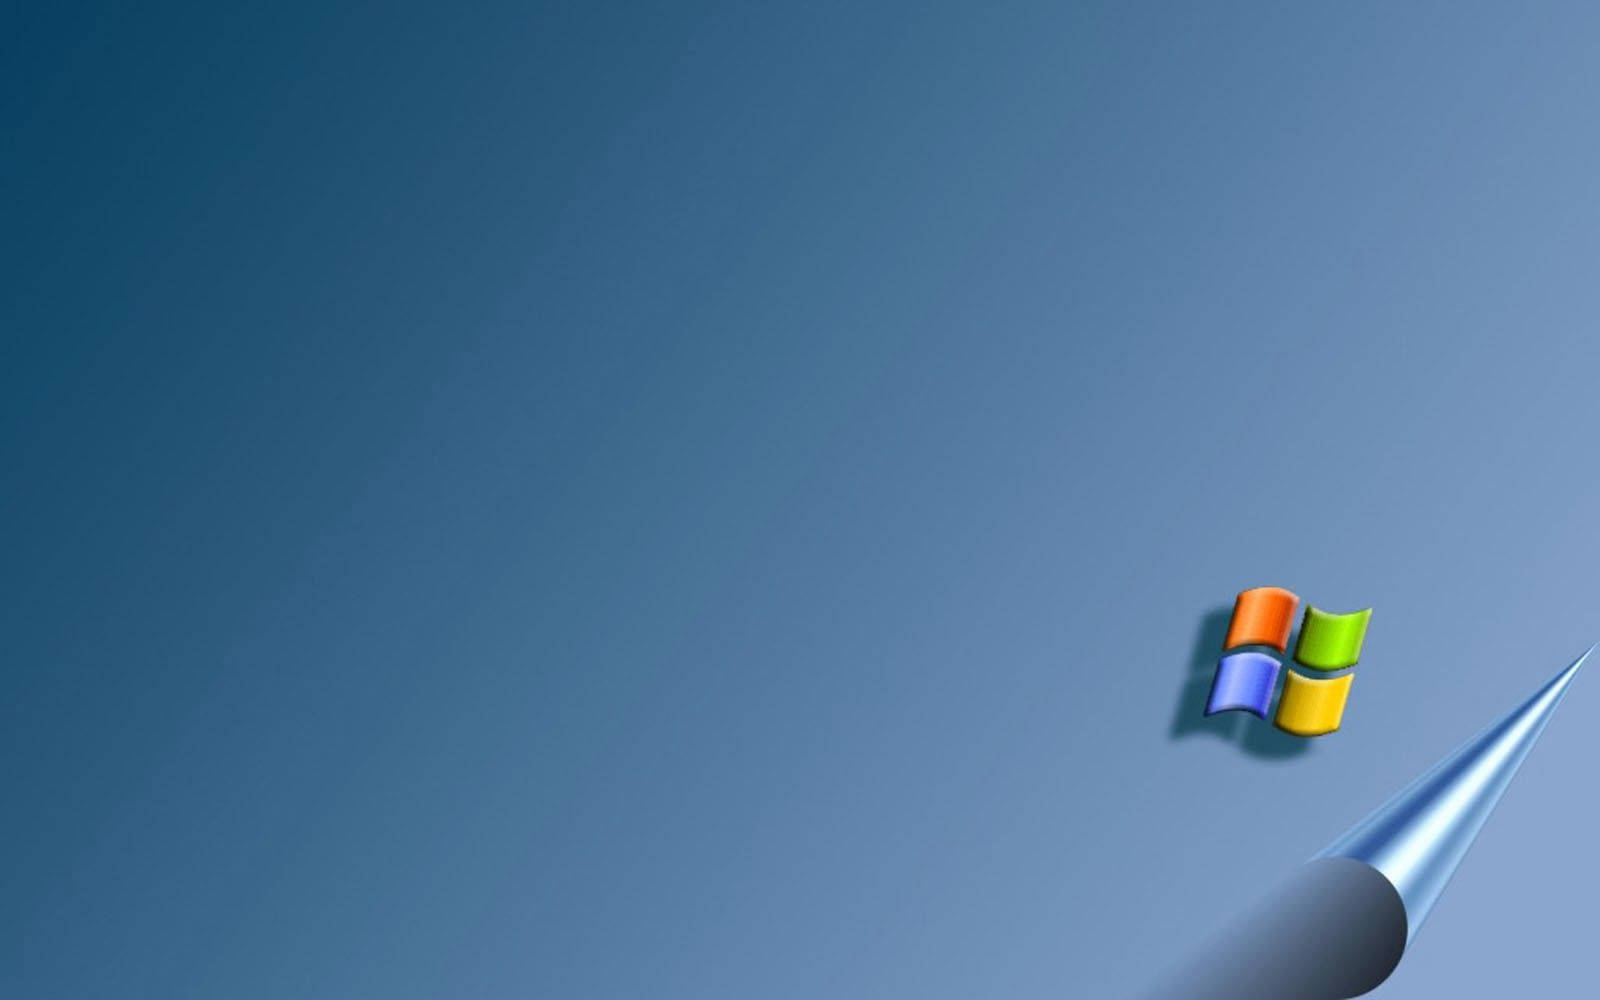 Turn the page to discover the power of Microsoft Wallpaper